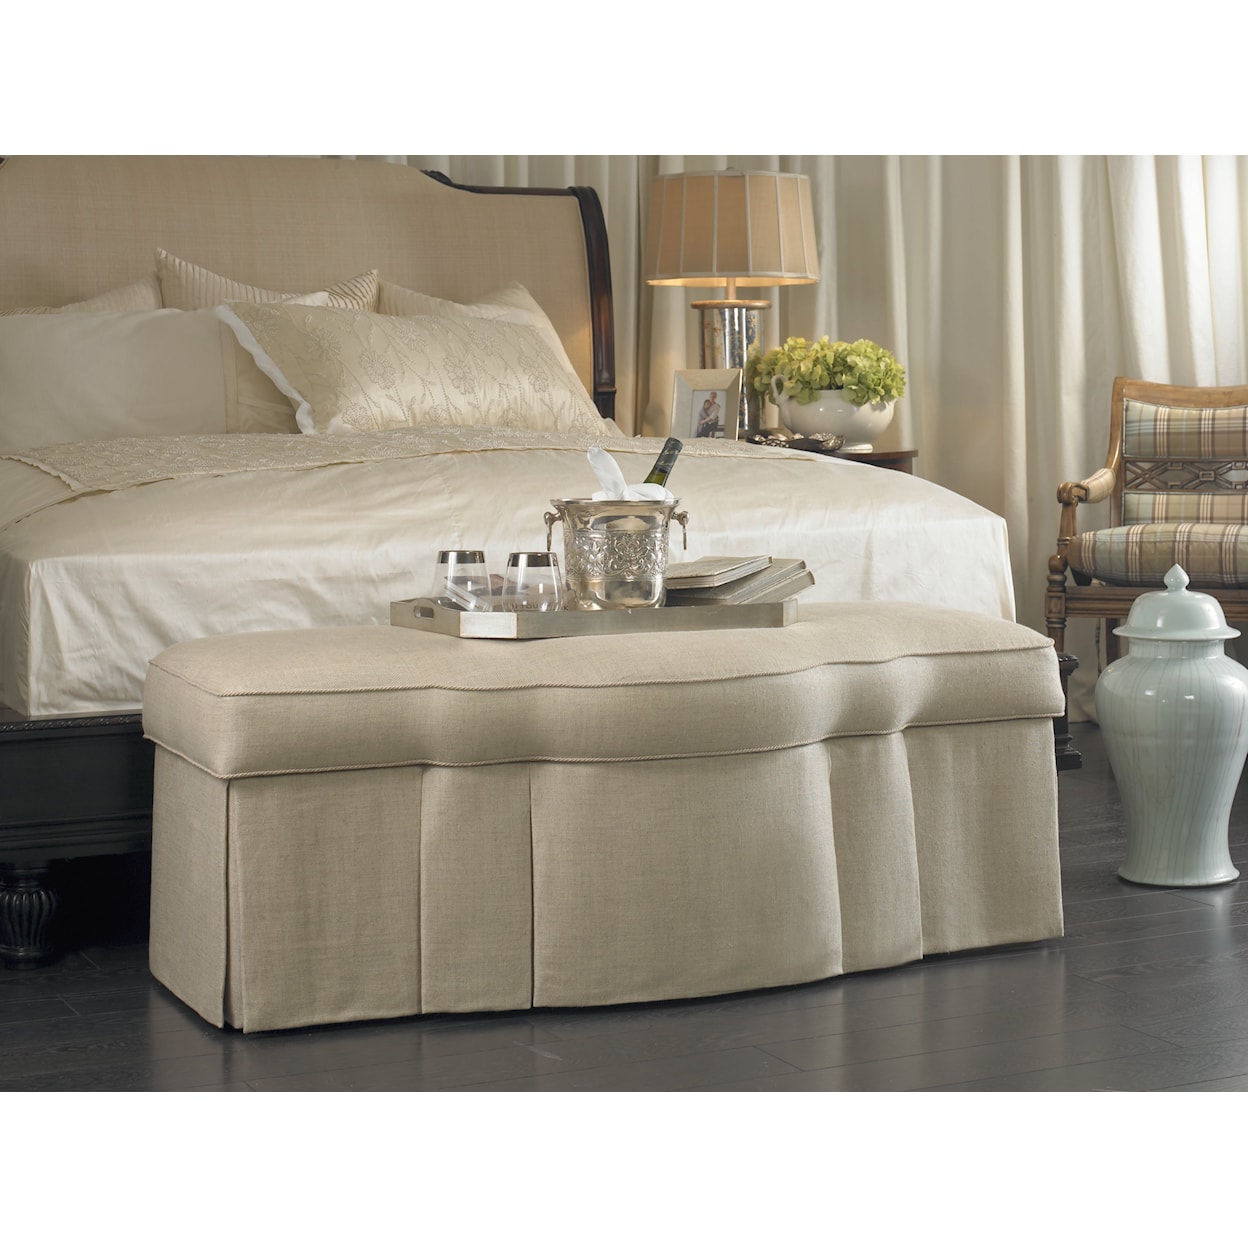 Century Signature Upholstered Accents Storage Bench